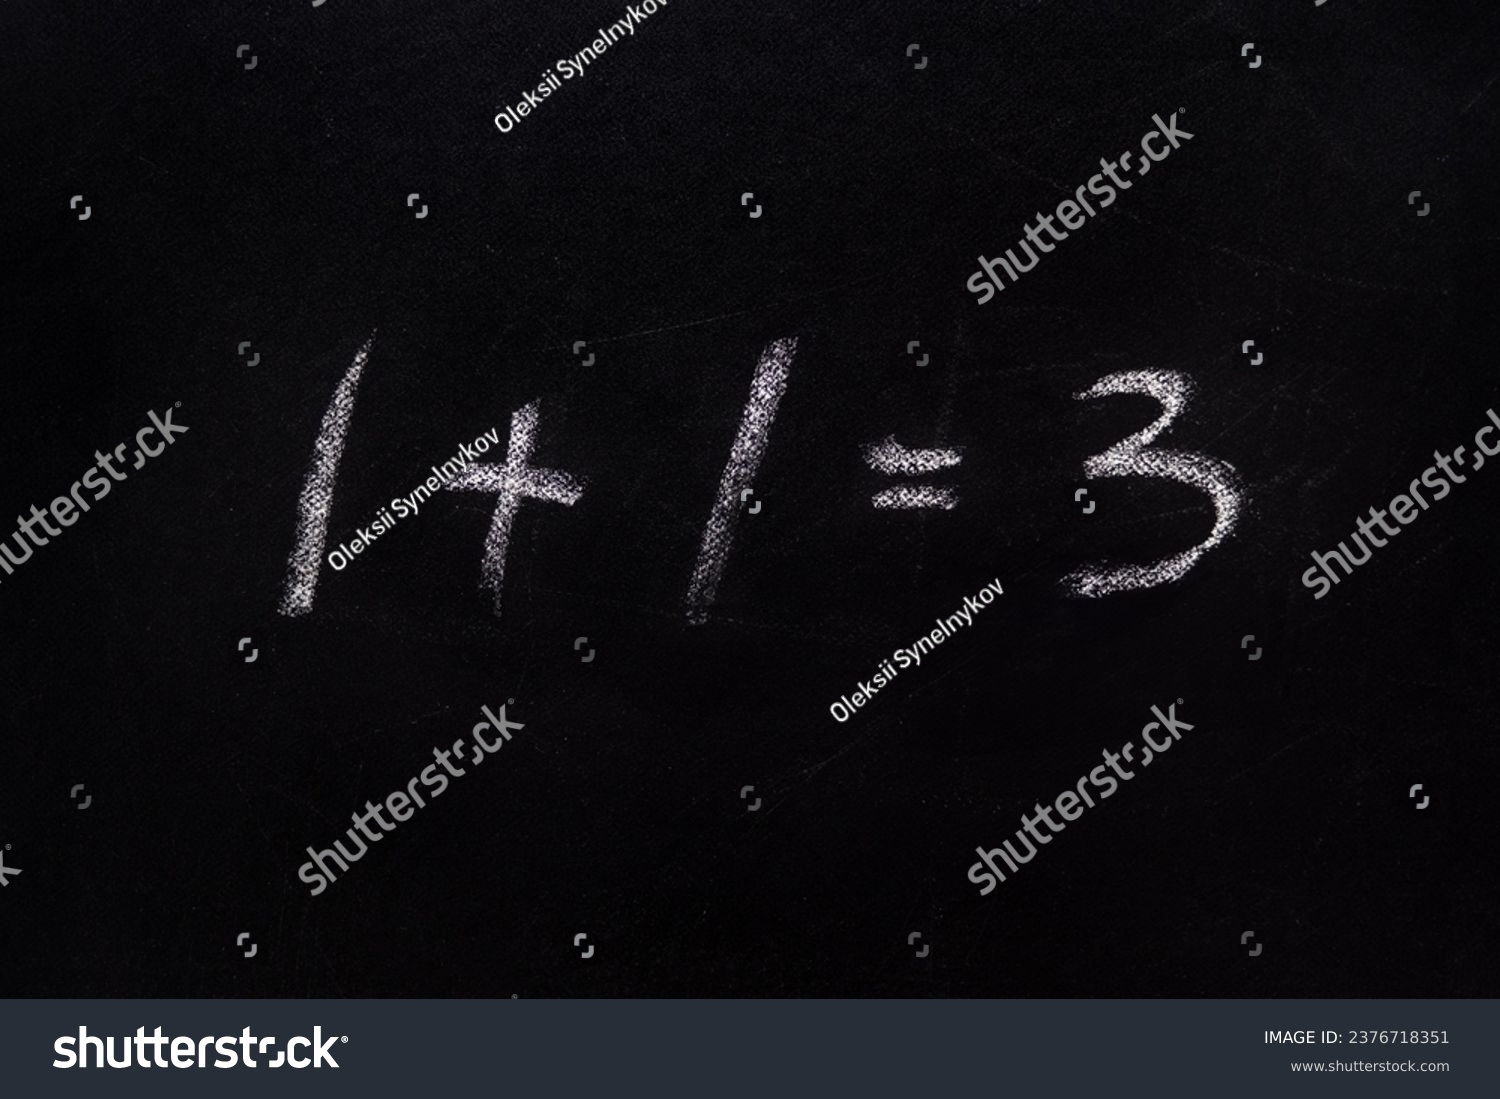 Wrong sum 1 1 3 written blackboard equation one plus one equals three written black board. Incorrect sum 1 plus 1 equals 3 writing chalkboard background. Buy two get one free. Simple math. Add. Sale #2376718351